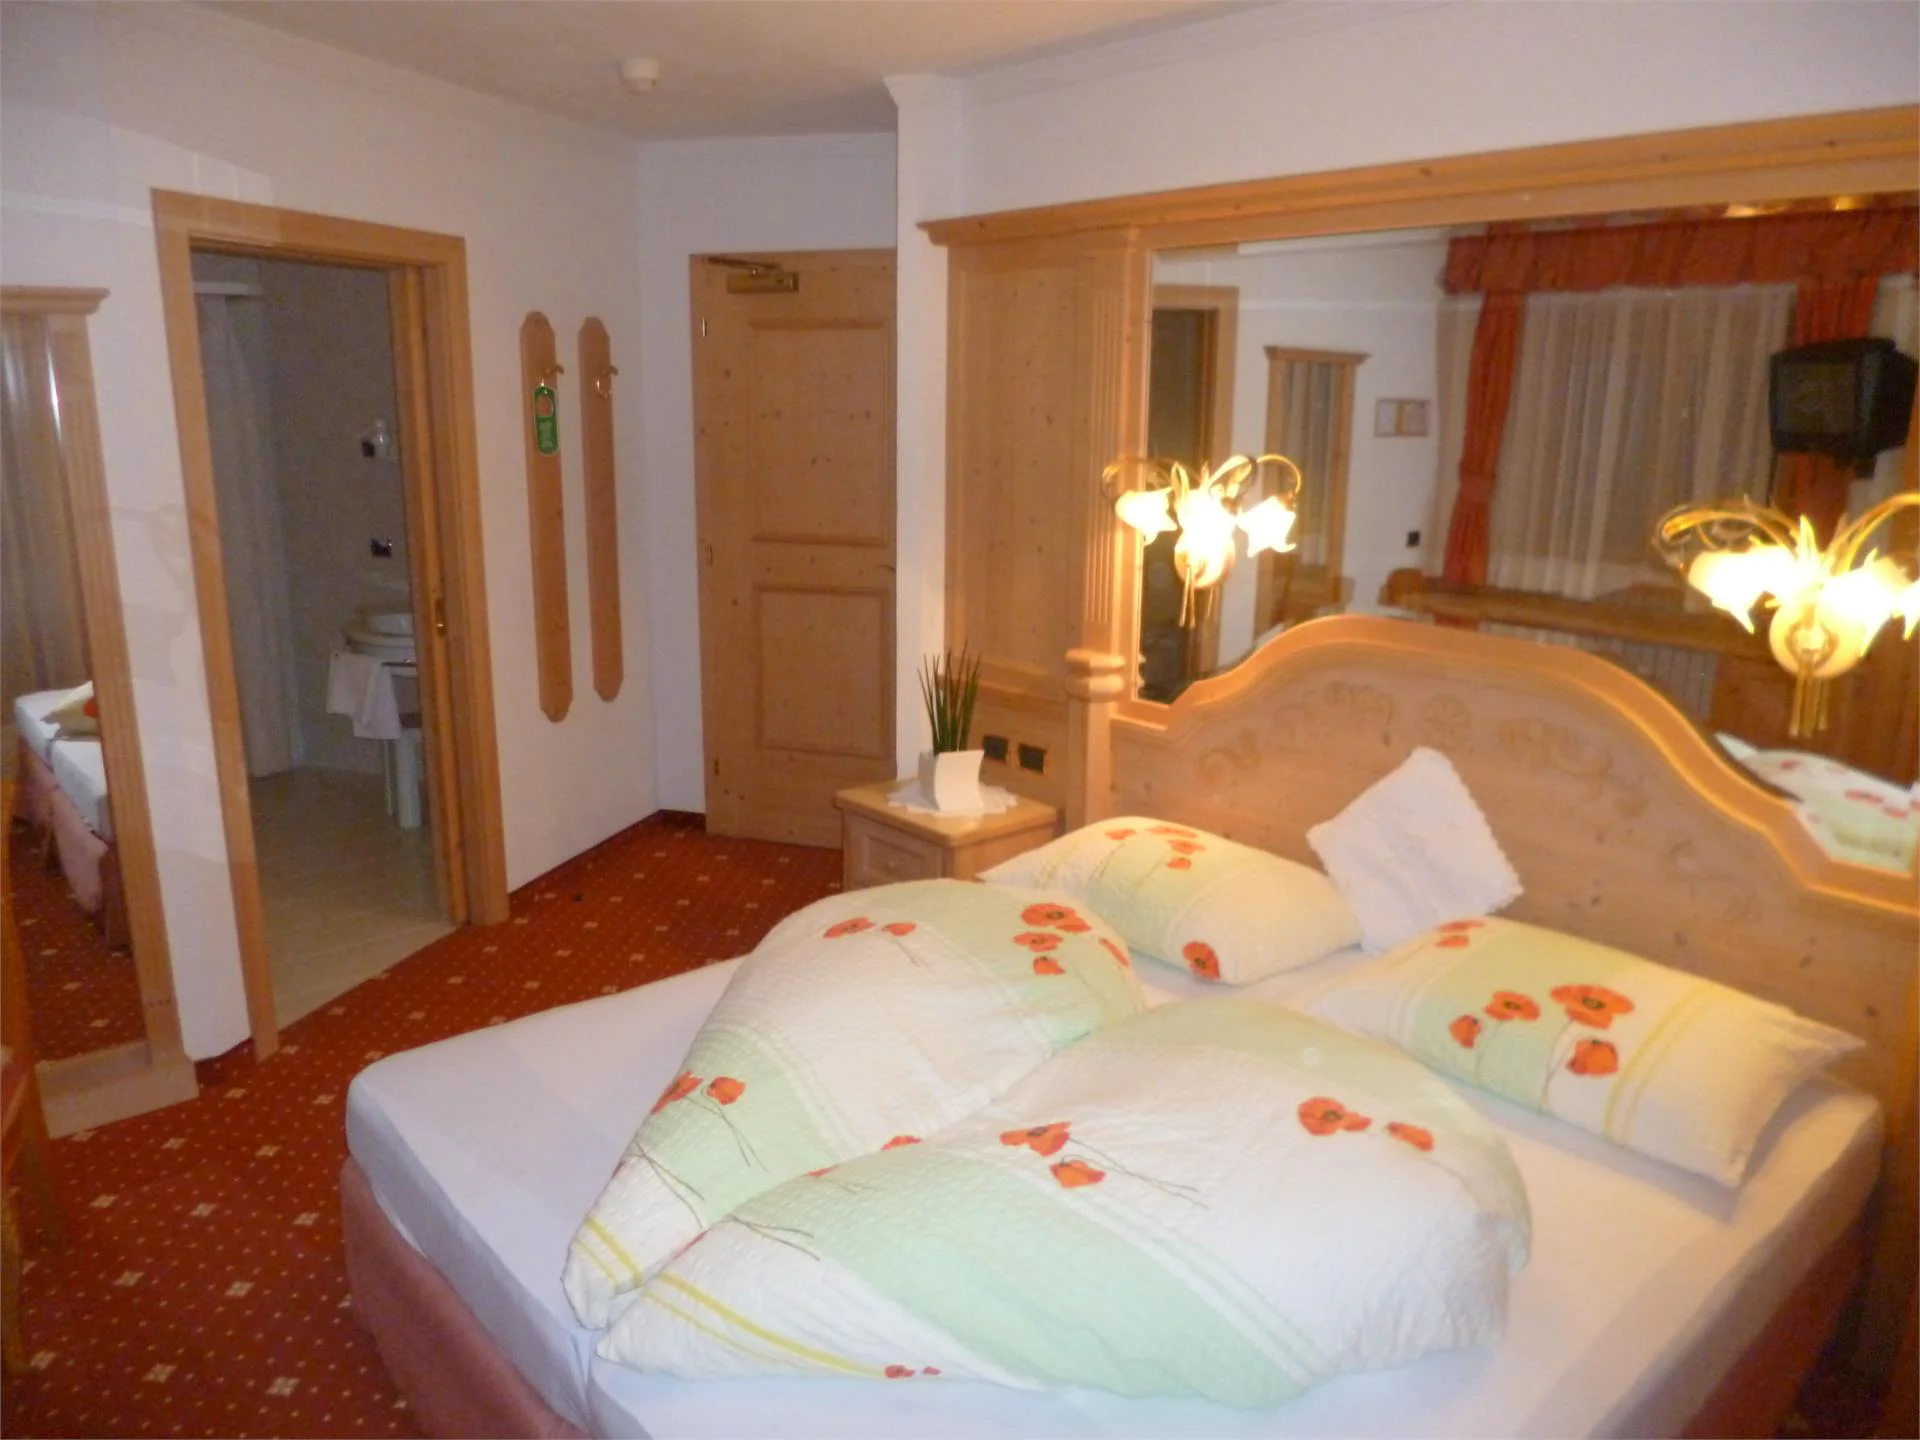 Hotel Mair Sand in Taufers/Campo Tures 3 suedtirol.info